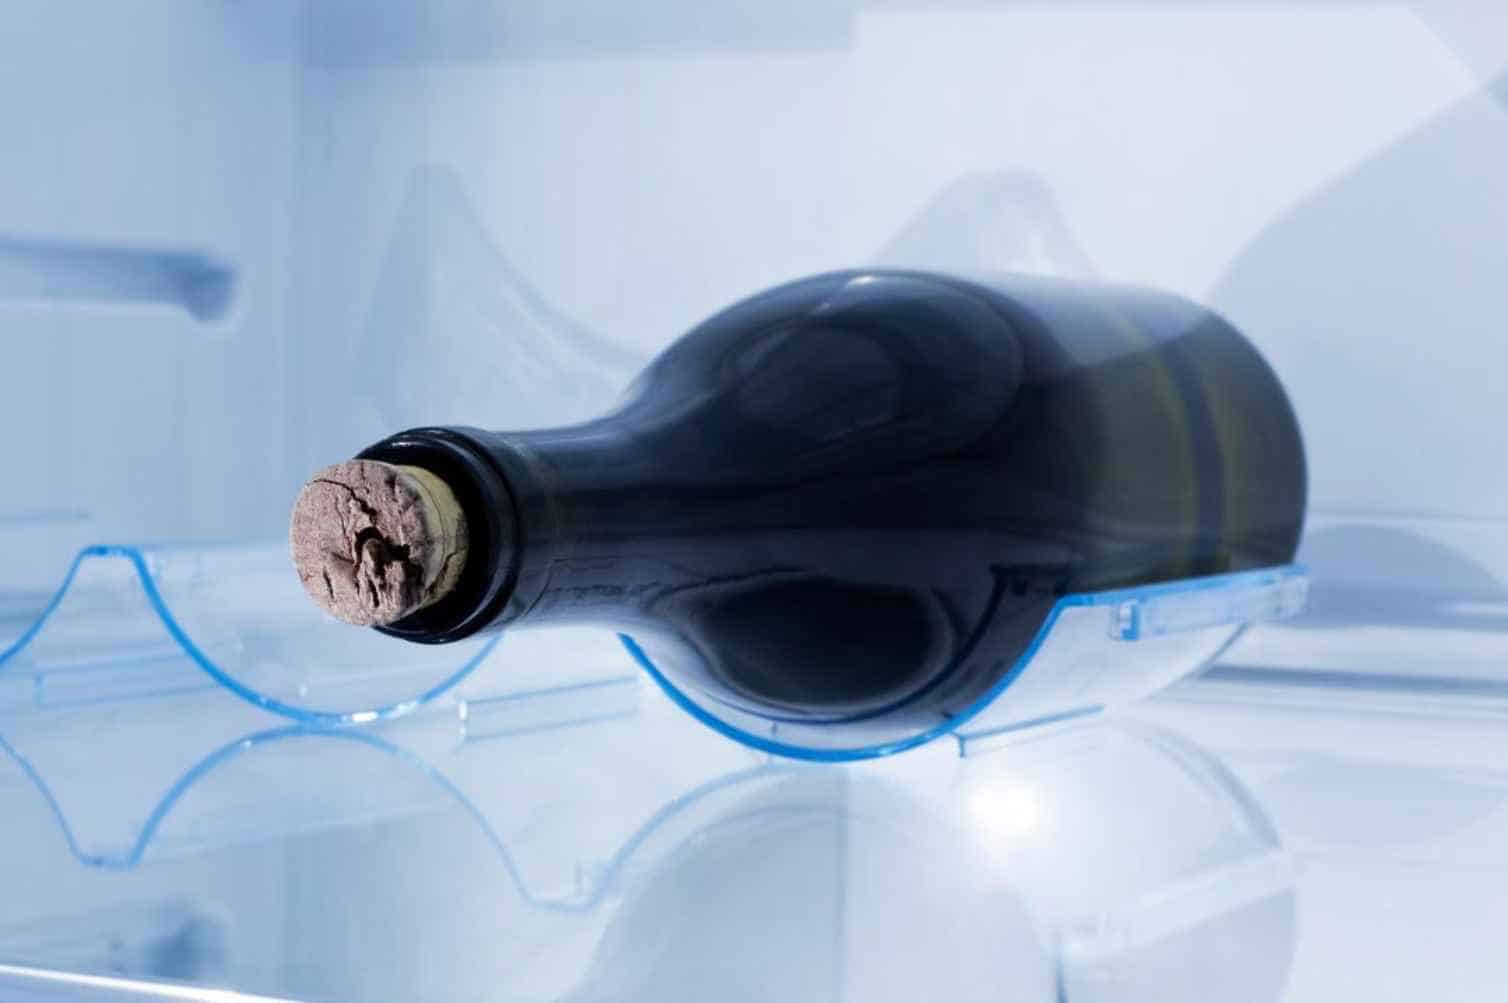 Things to Remember When Keeping Wine in the Freezer